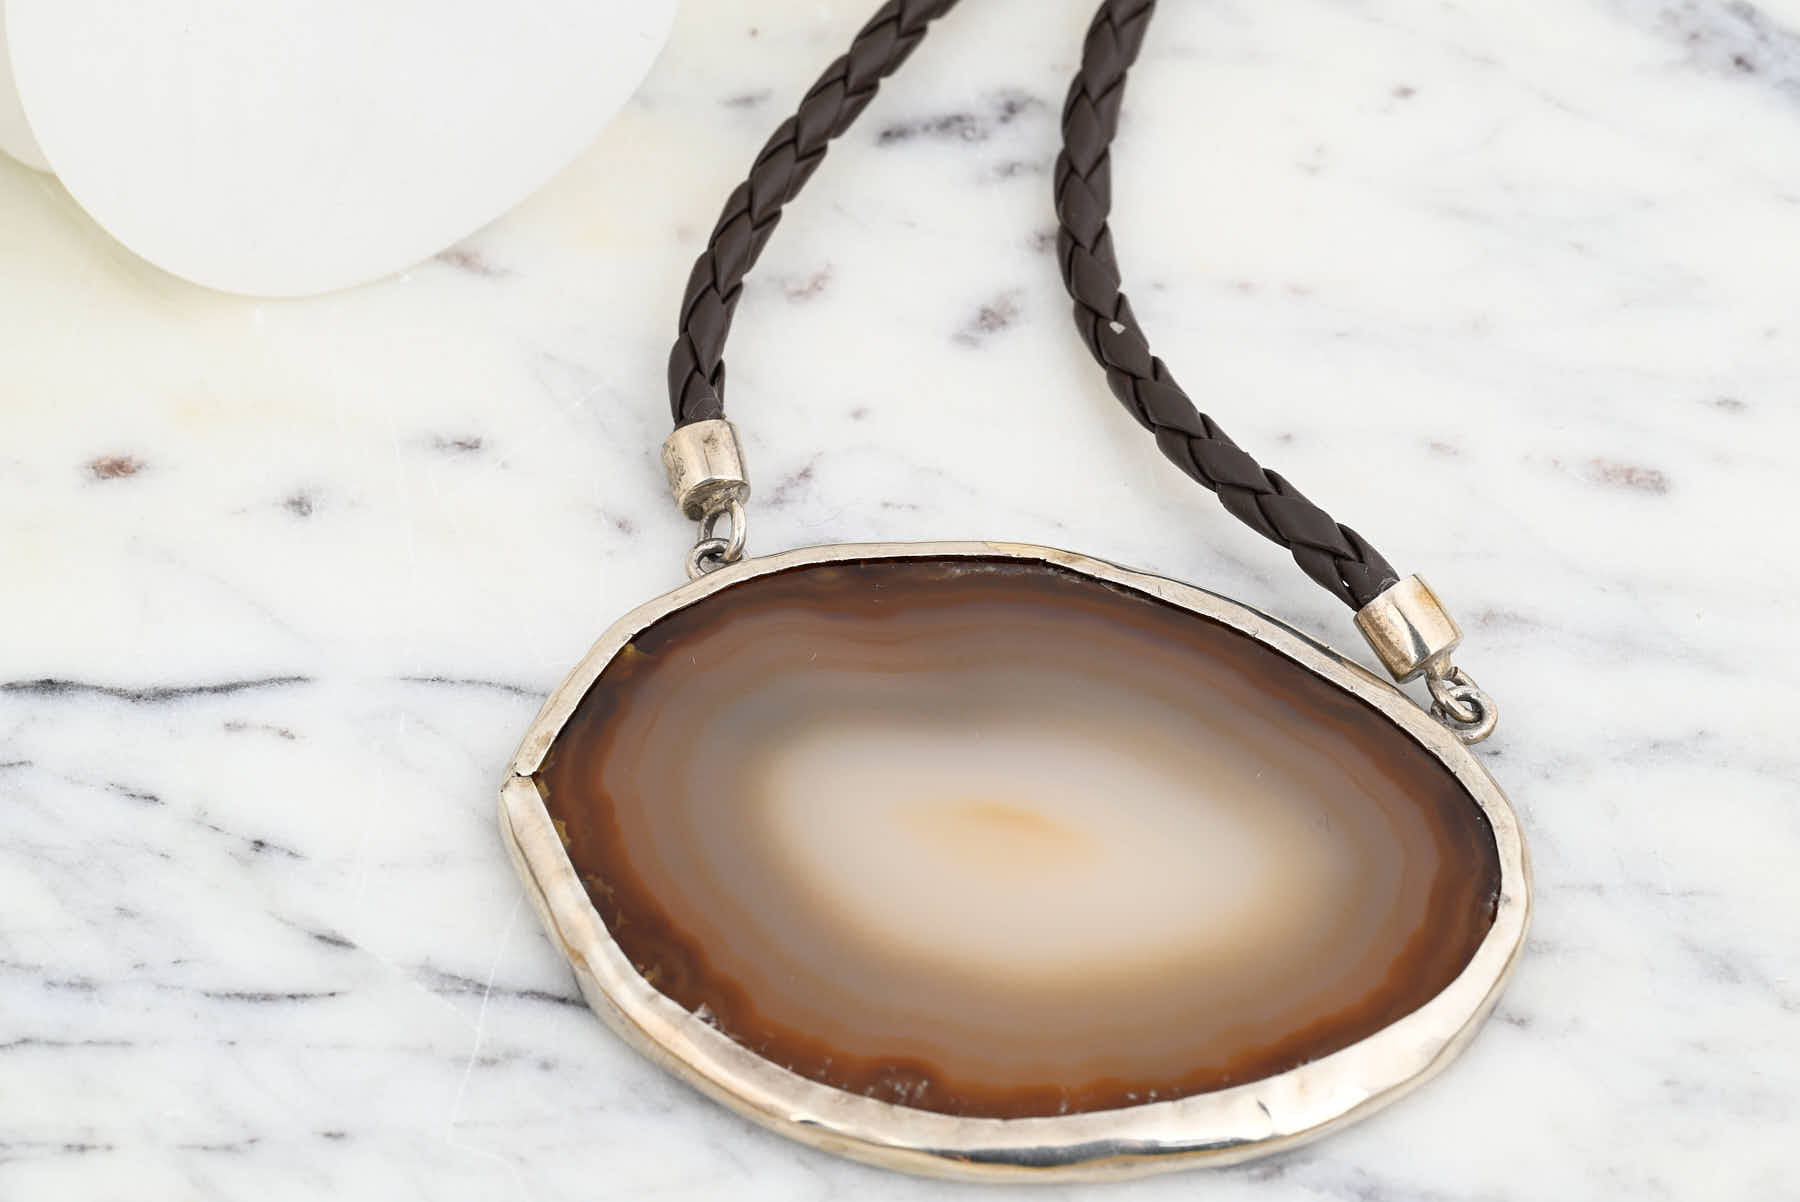 Natural Agate Leather Necklace - JWL-50046